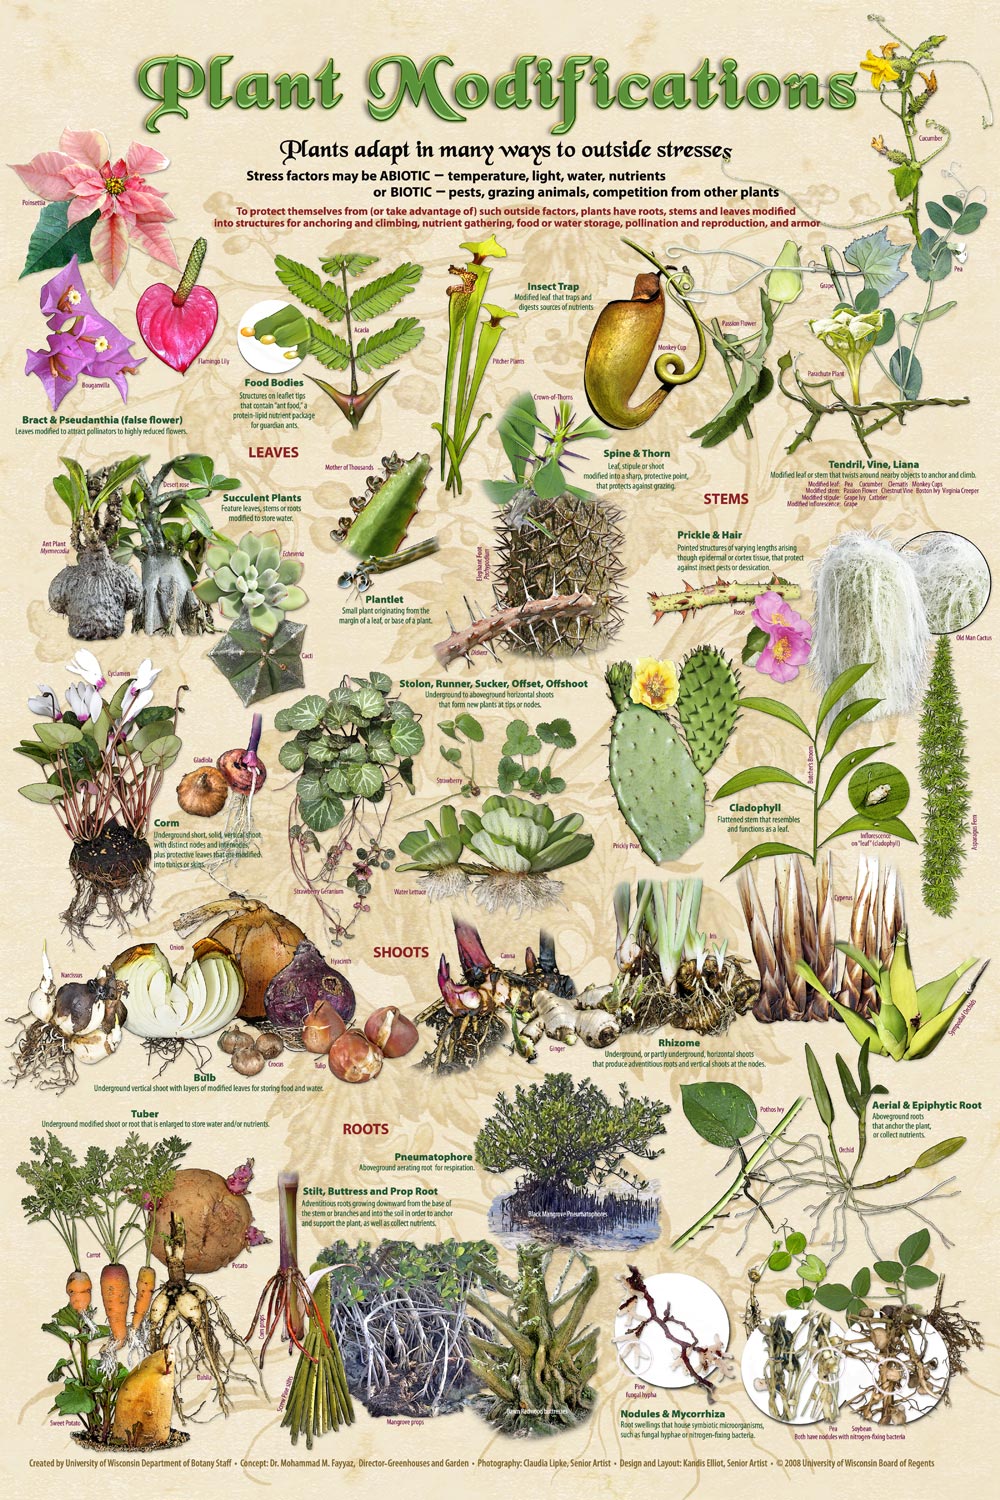 Plants Chart Posters